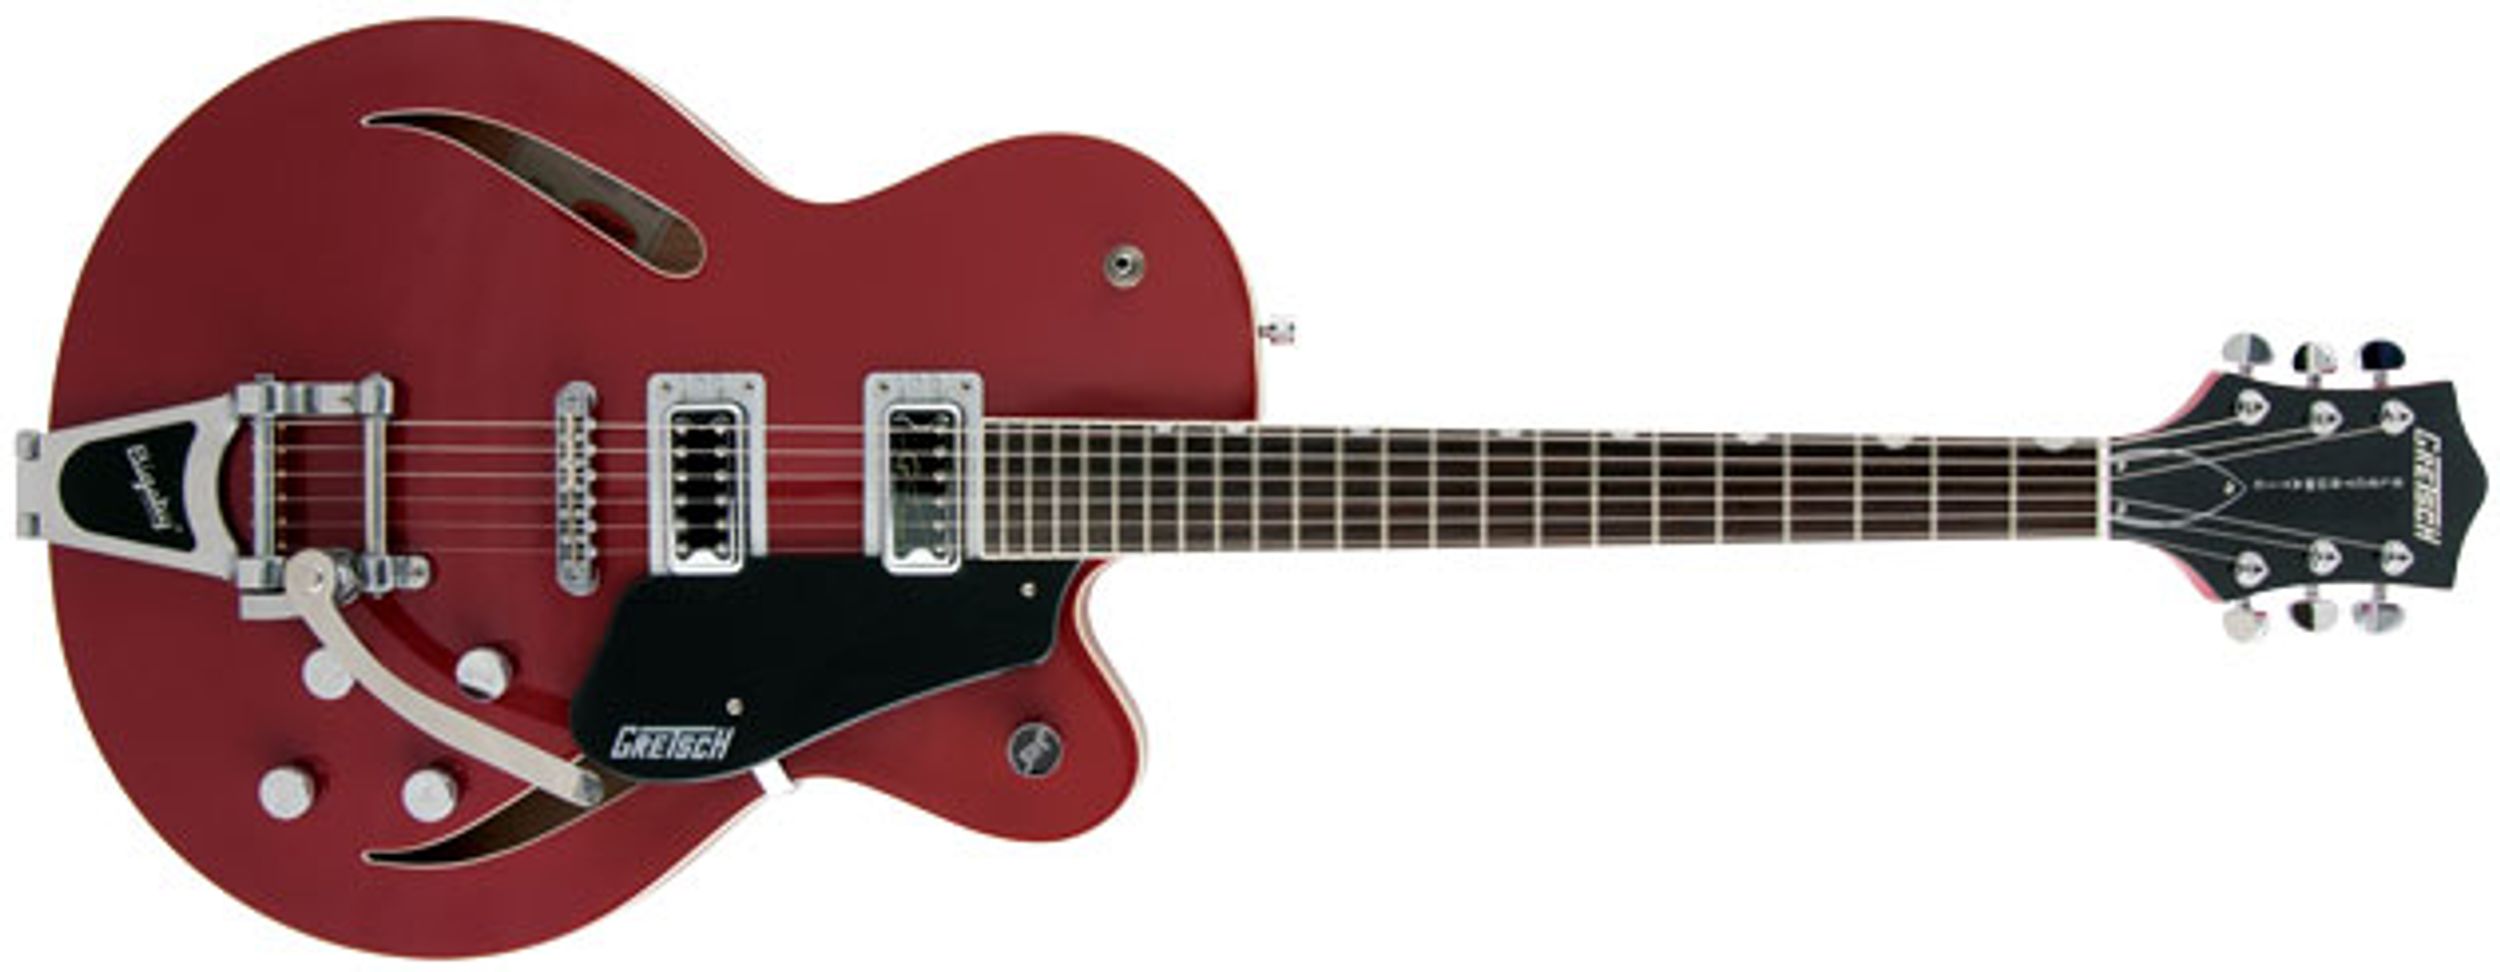 Gretsch G5620T-CB Electromatic Review